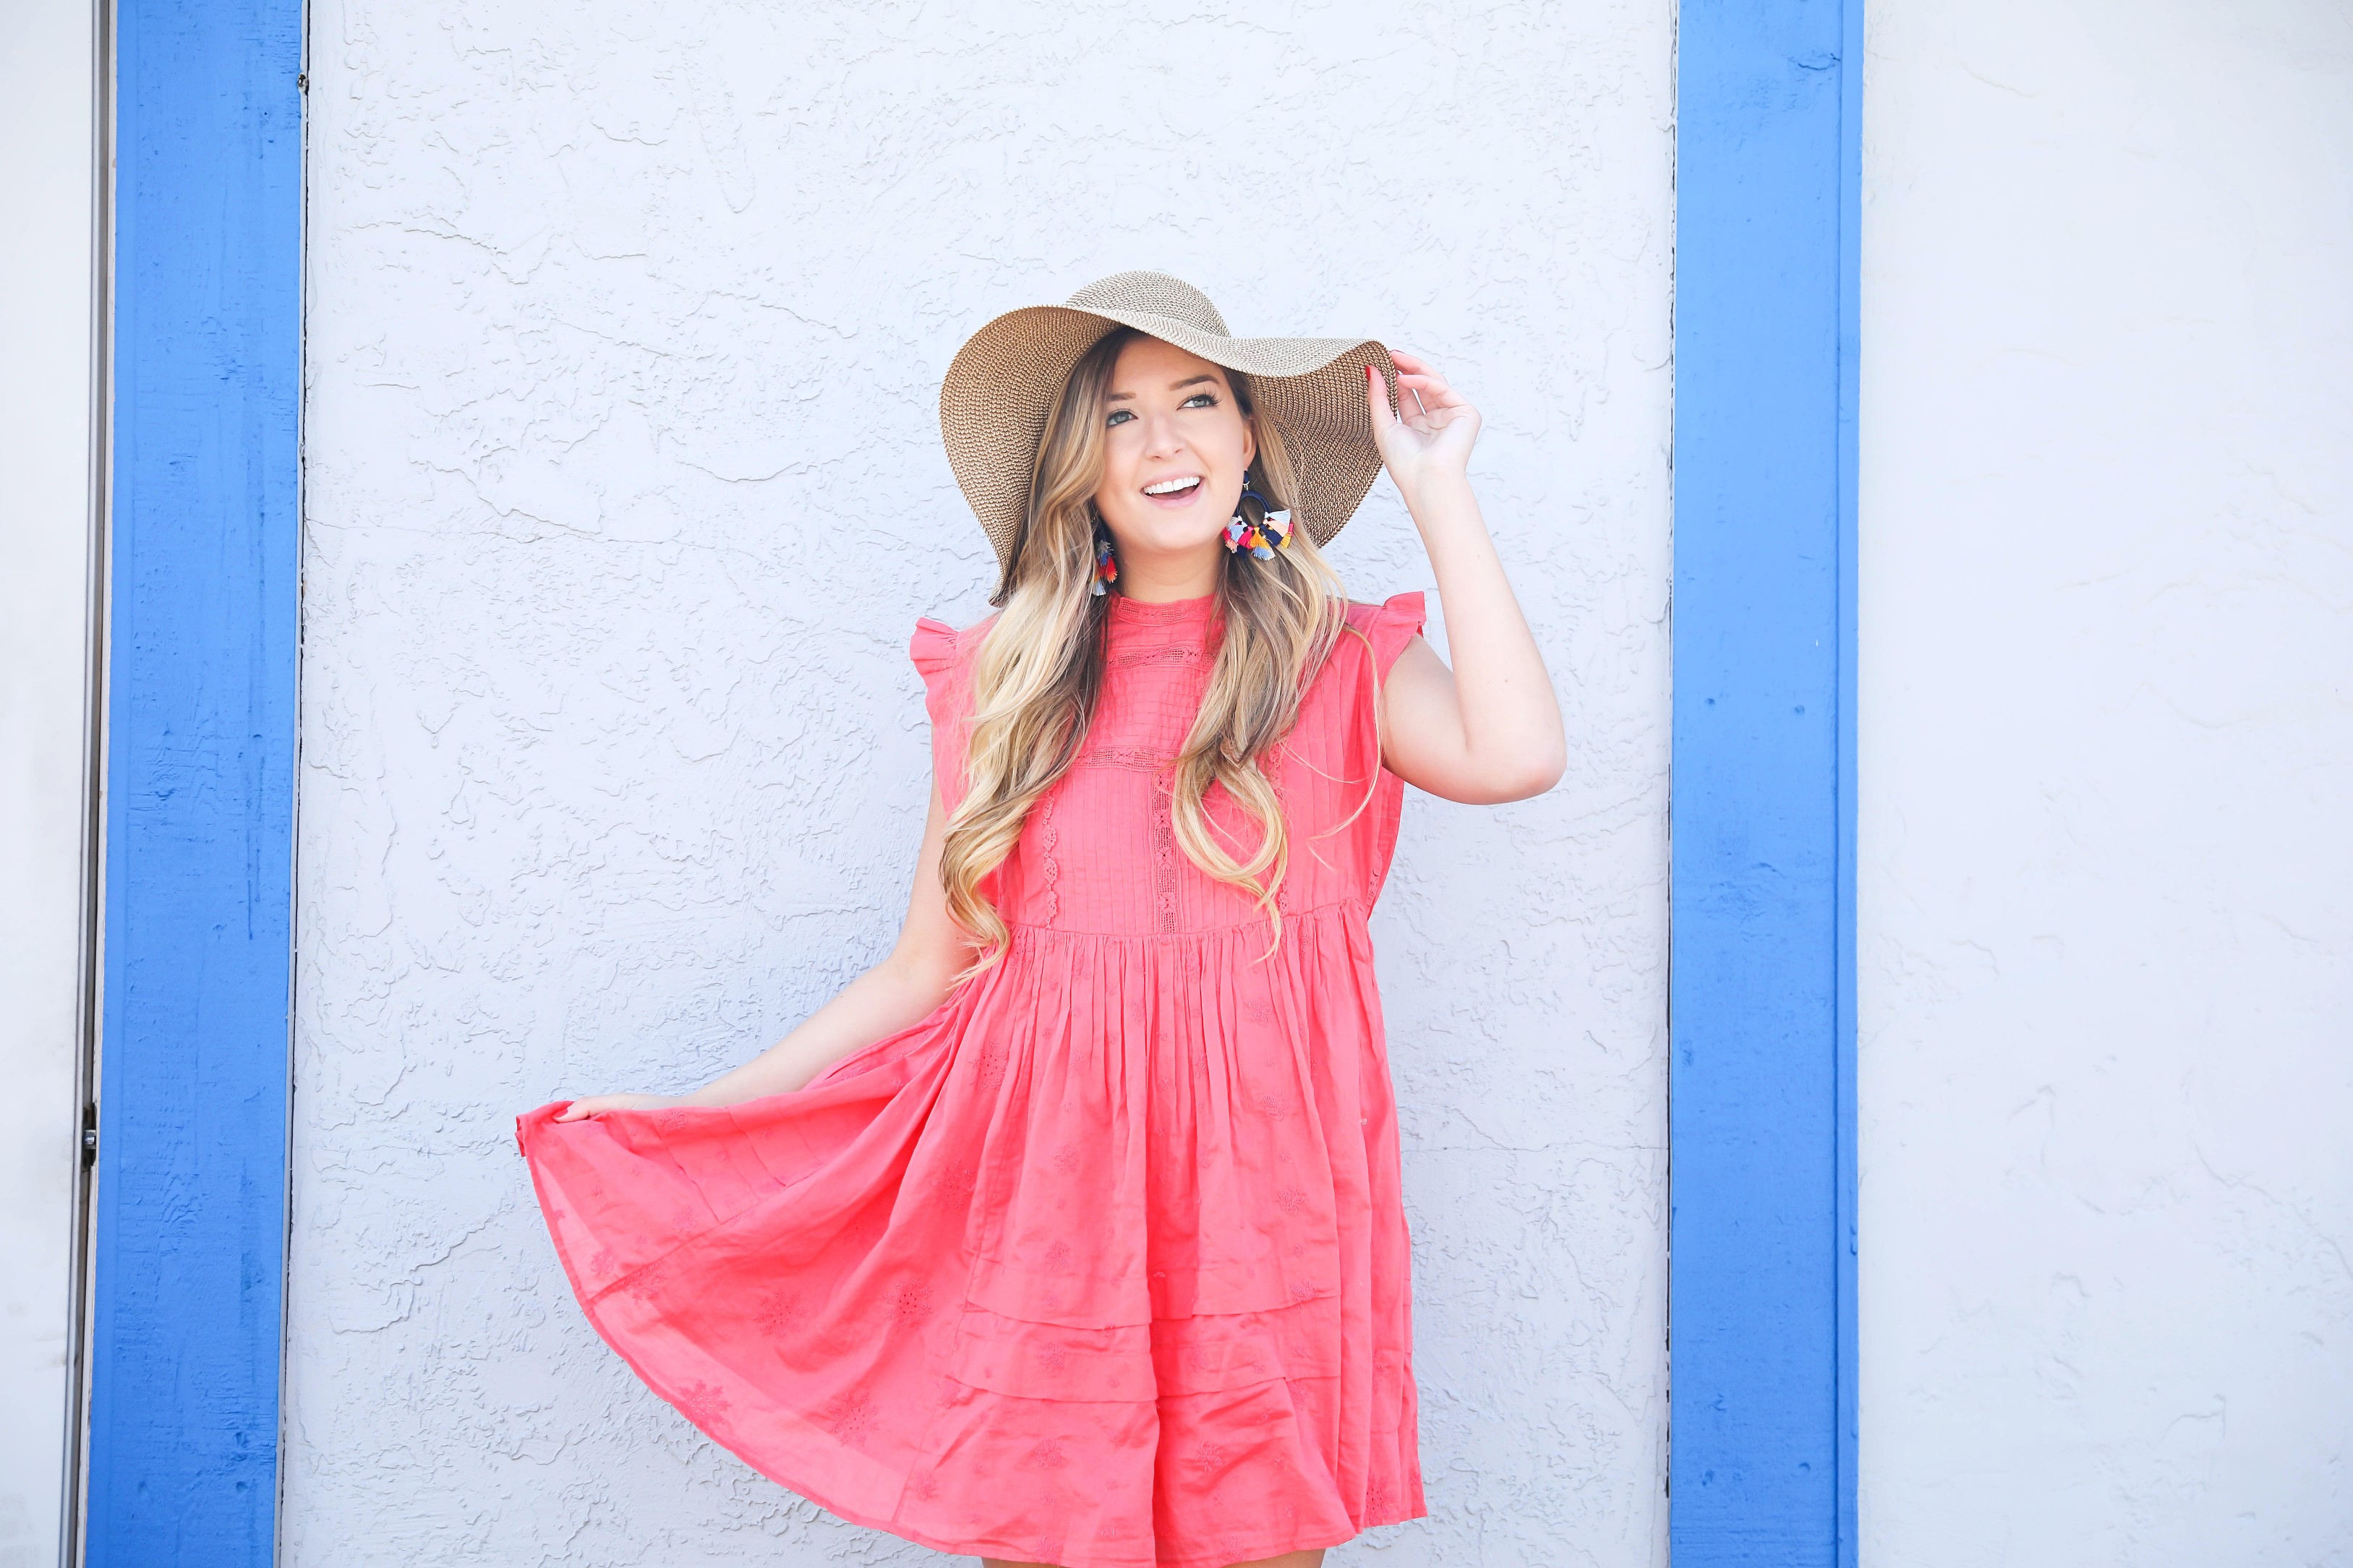 Coral babydoll dress by free people with floppy hat and bright tassel baublebar earrings! I love this outfit, it gives off Caribbean vibes because it is such a bright outfit! Details on fashion blog daily dose of charm by lauren lindmark